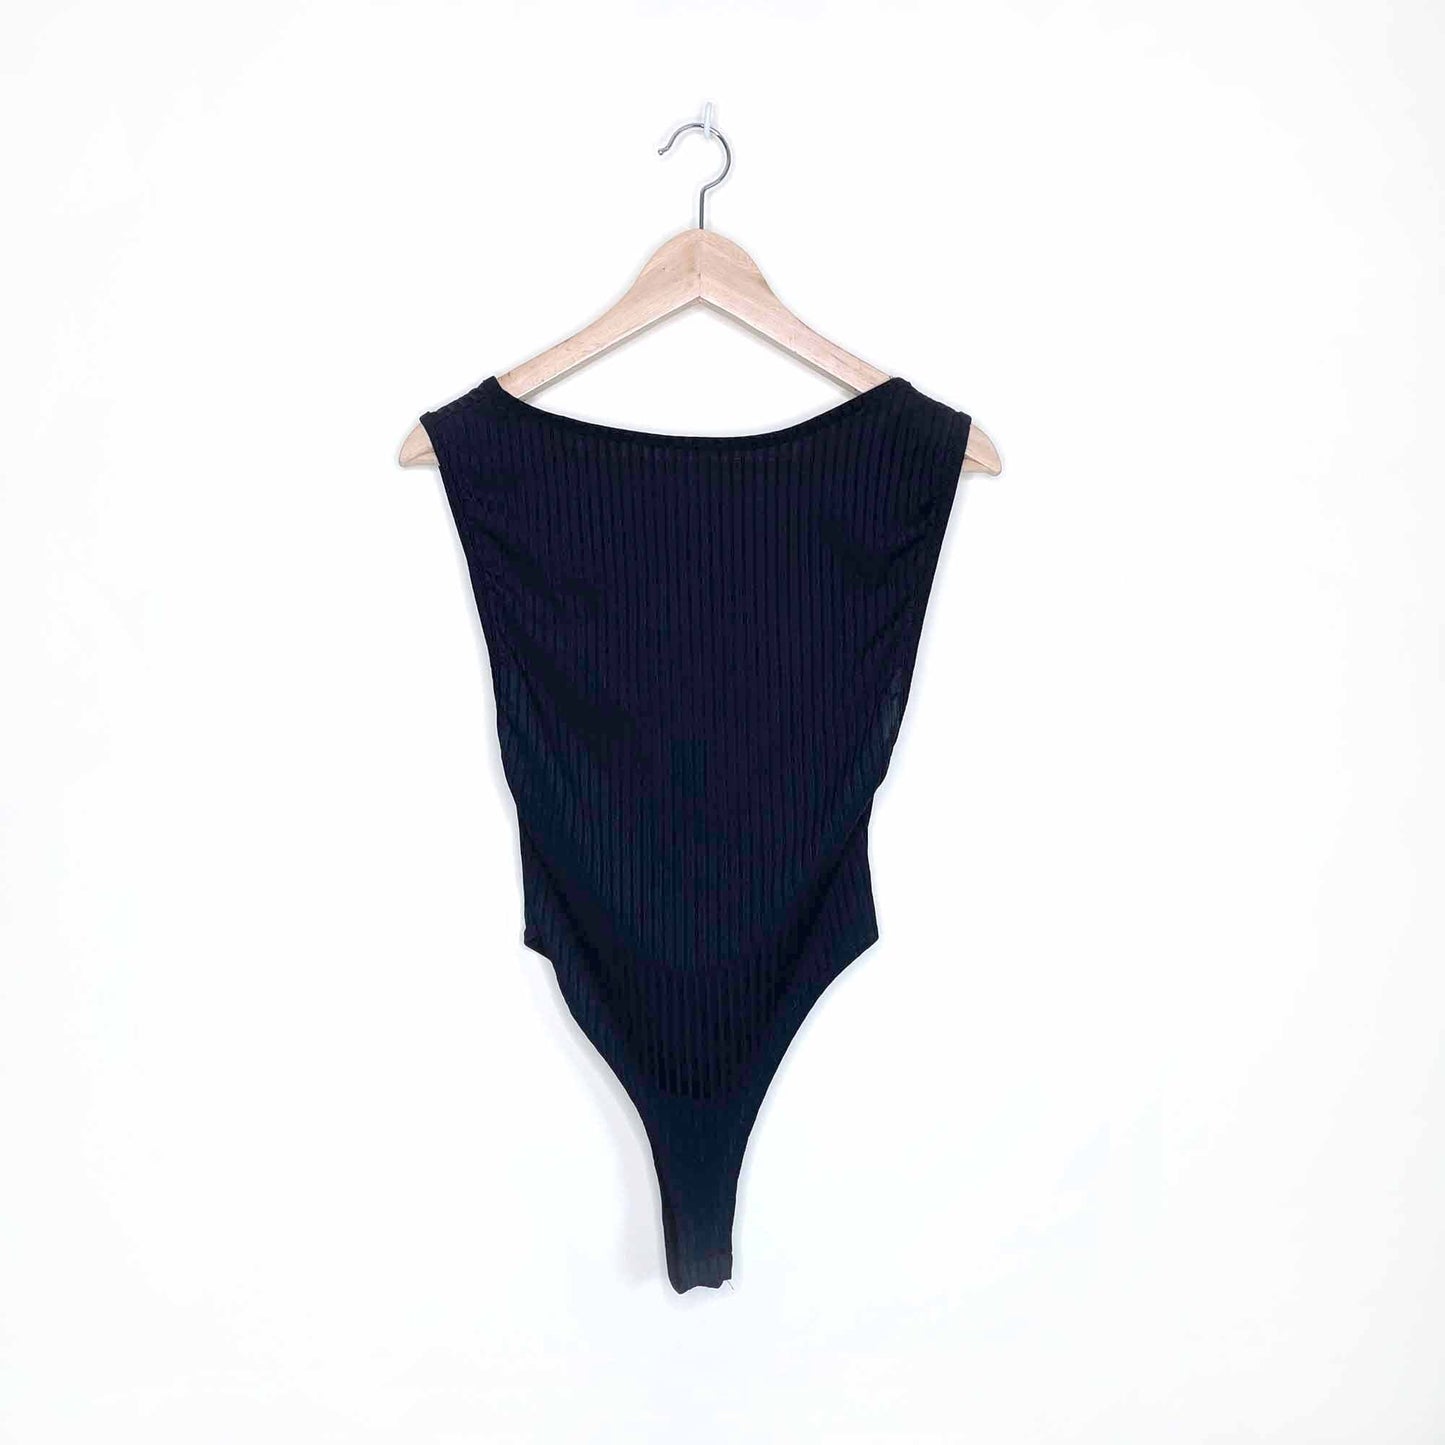 NWT Nasty Gal Turn the lights down low ribbed bodysuit - size 6